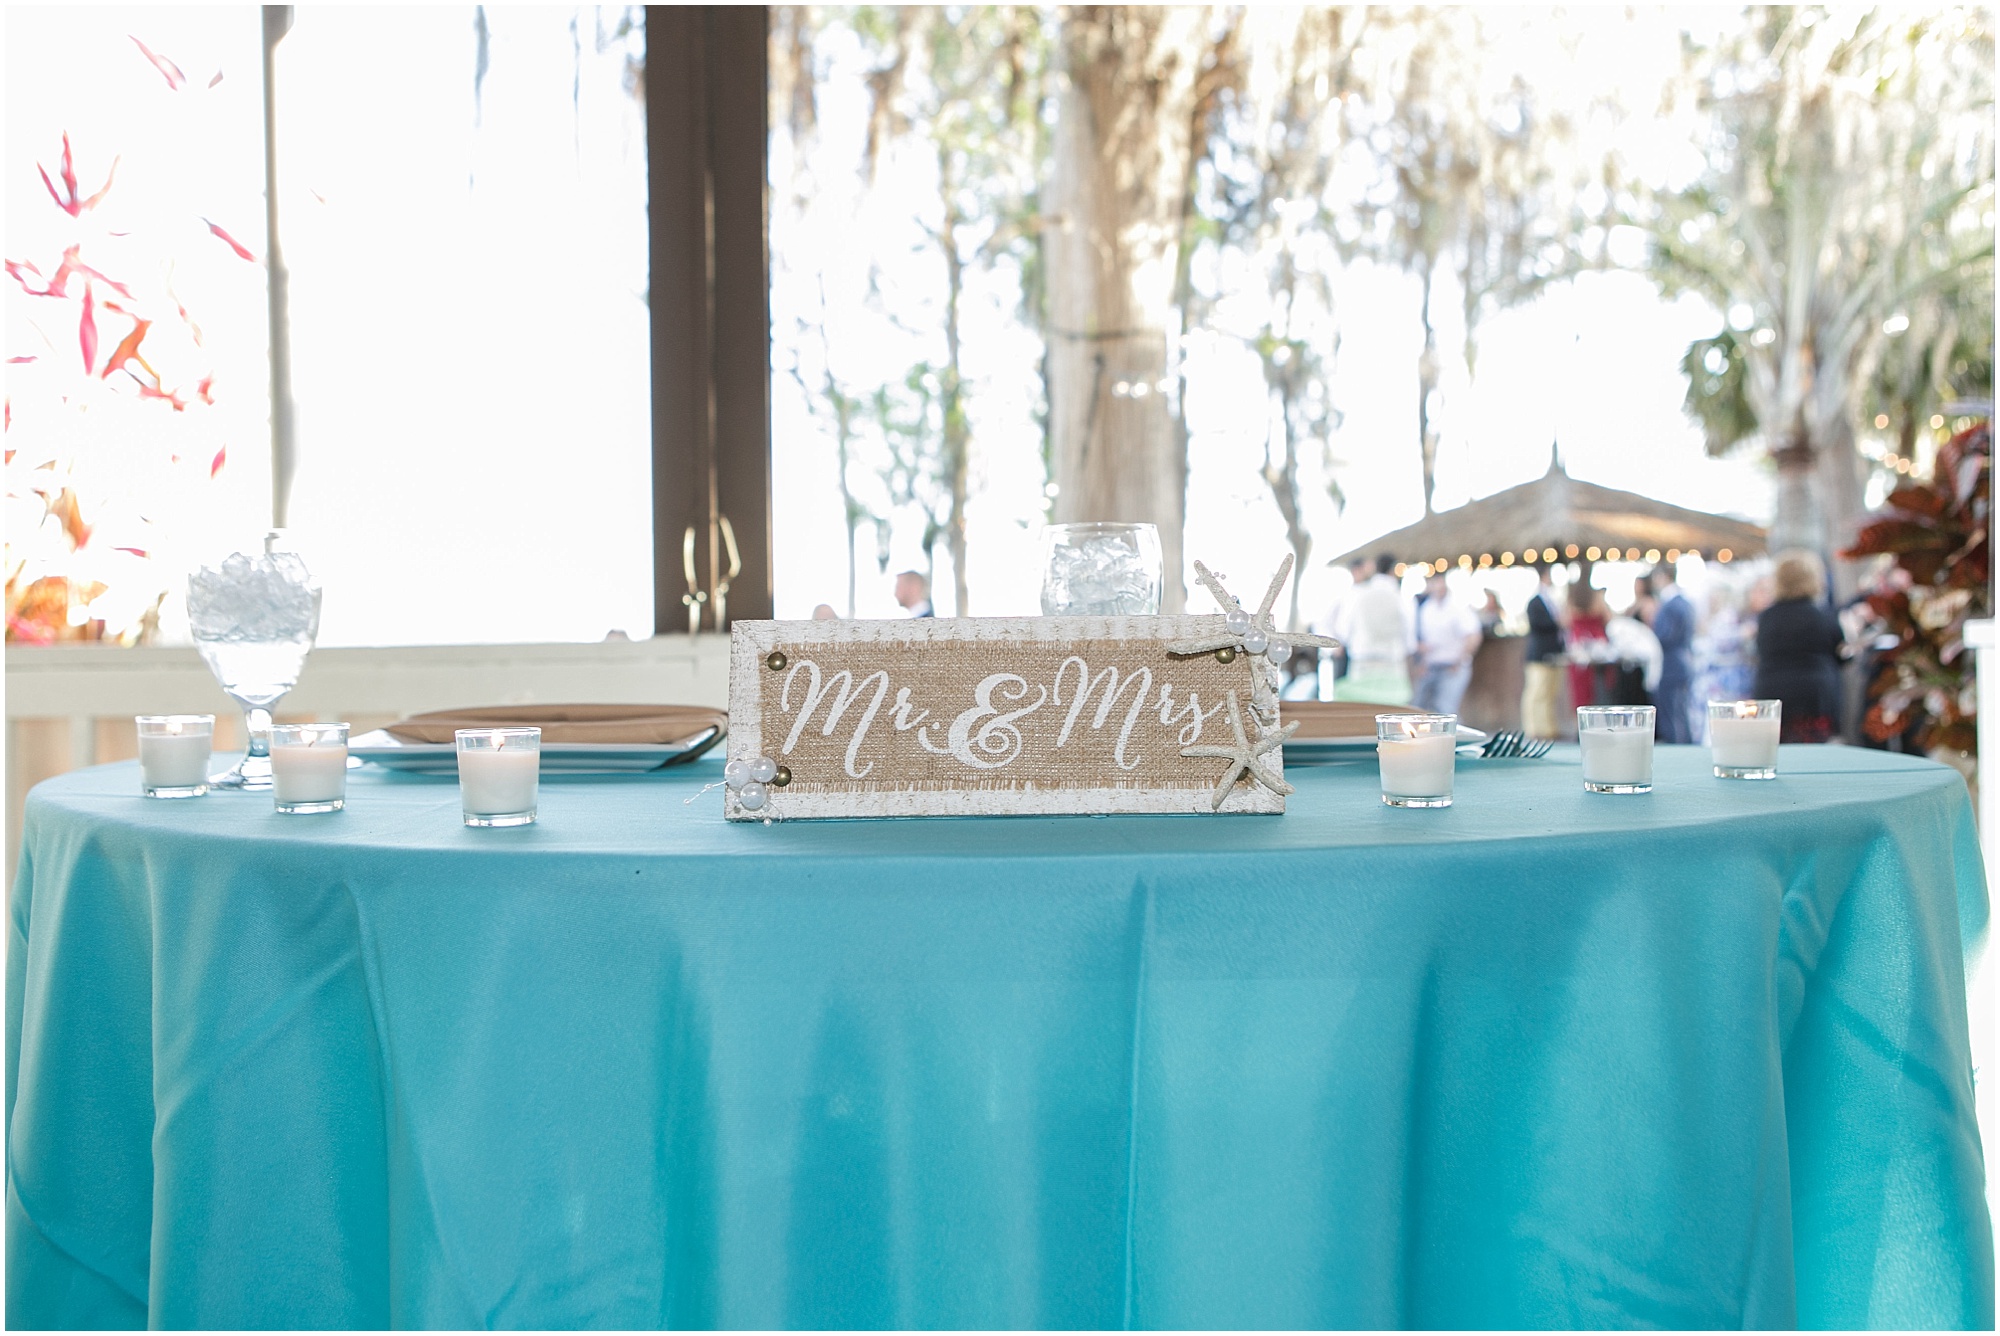 Sweetheart table for paradise bride and groom at their reception. 